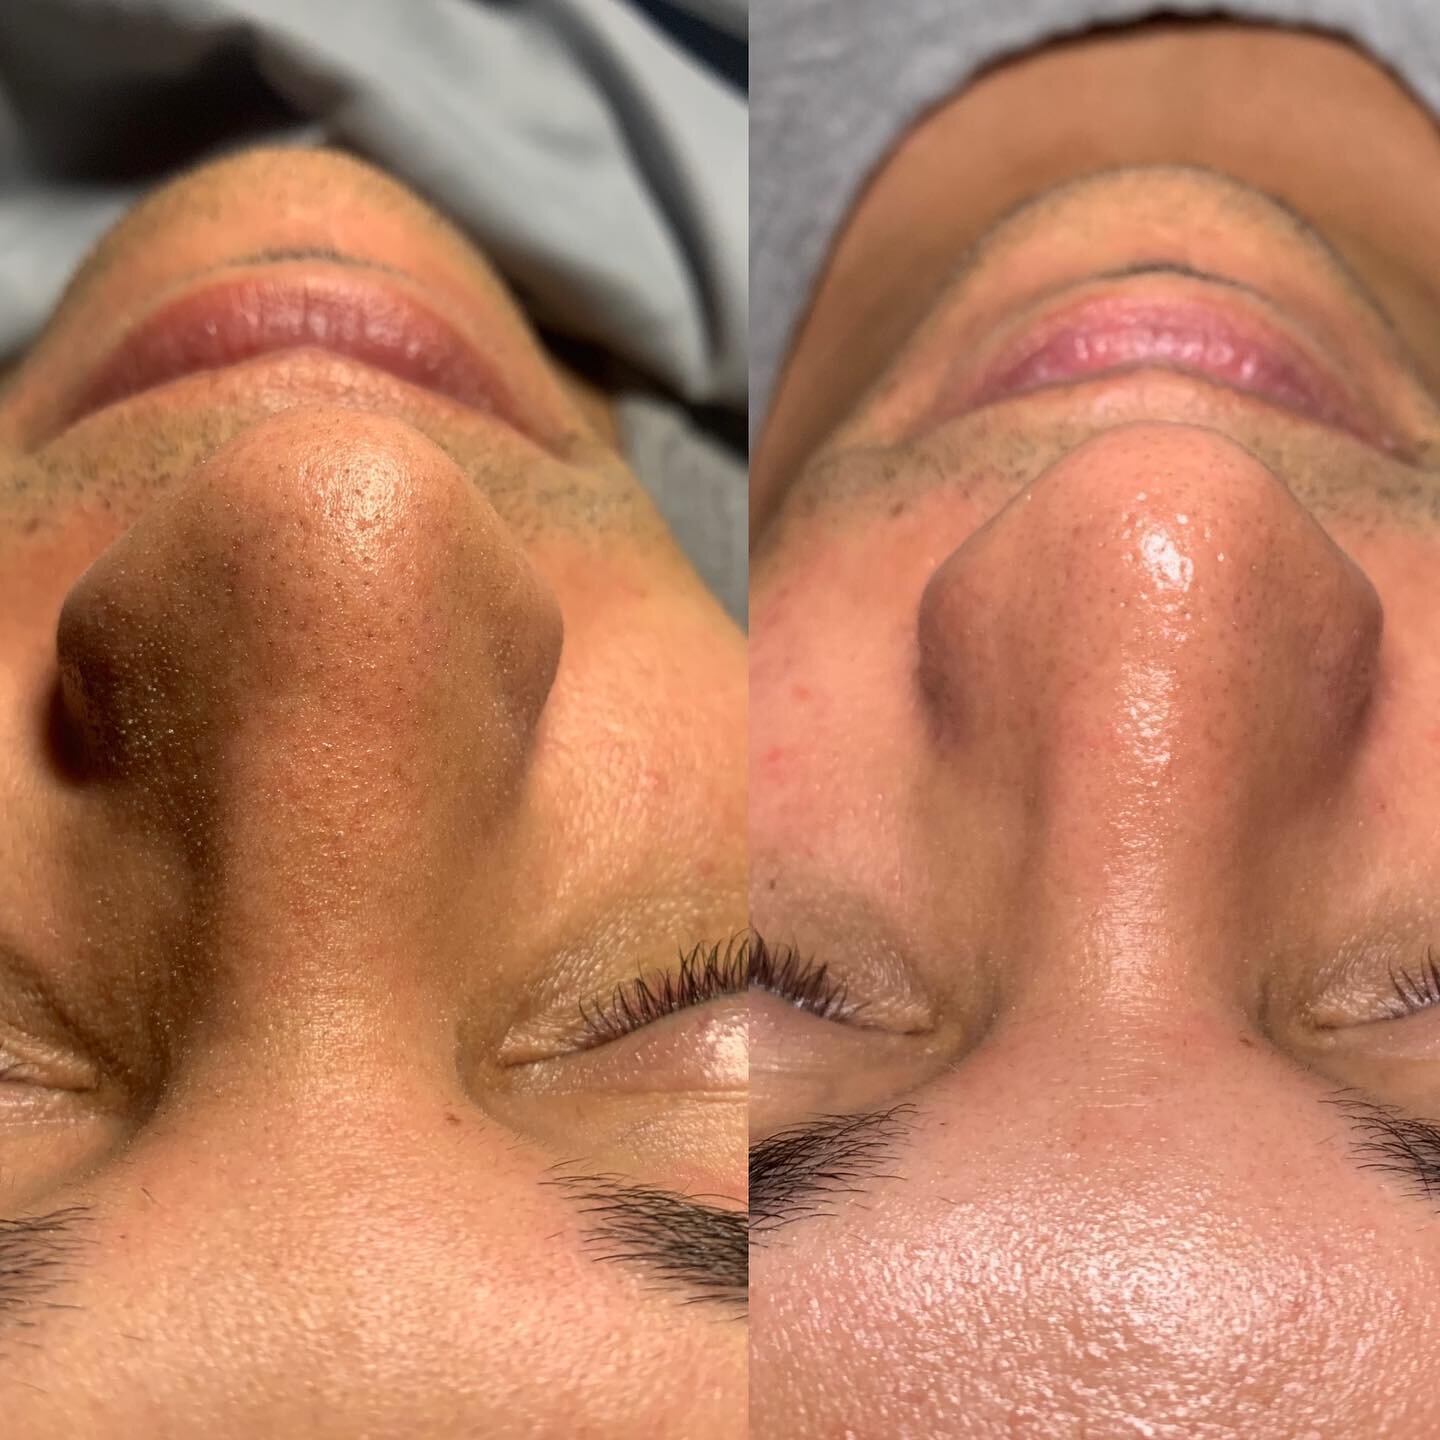 NEW SERVICE ALERT🚨 

HydroGlow Facial is now available for online booking! 

This facial includes hydrodermabrasion -water, serums and suction for a deep cleanse, exfoliation and extractions, radio frequency therapy - a warming technology that helps